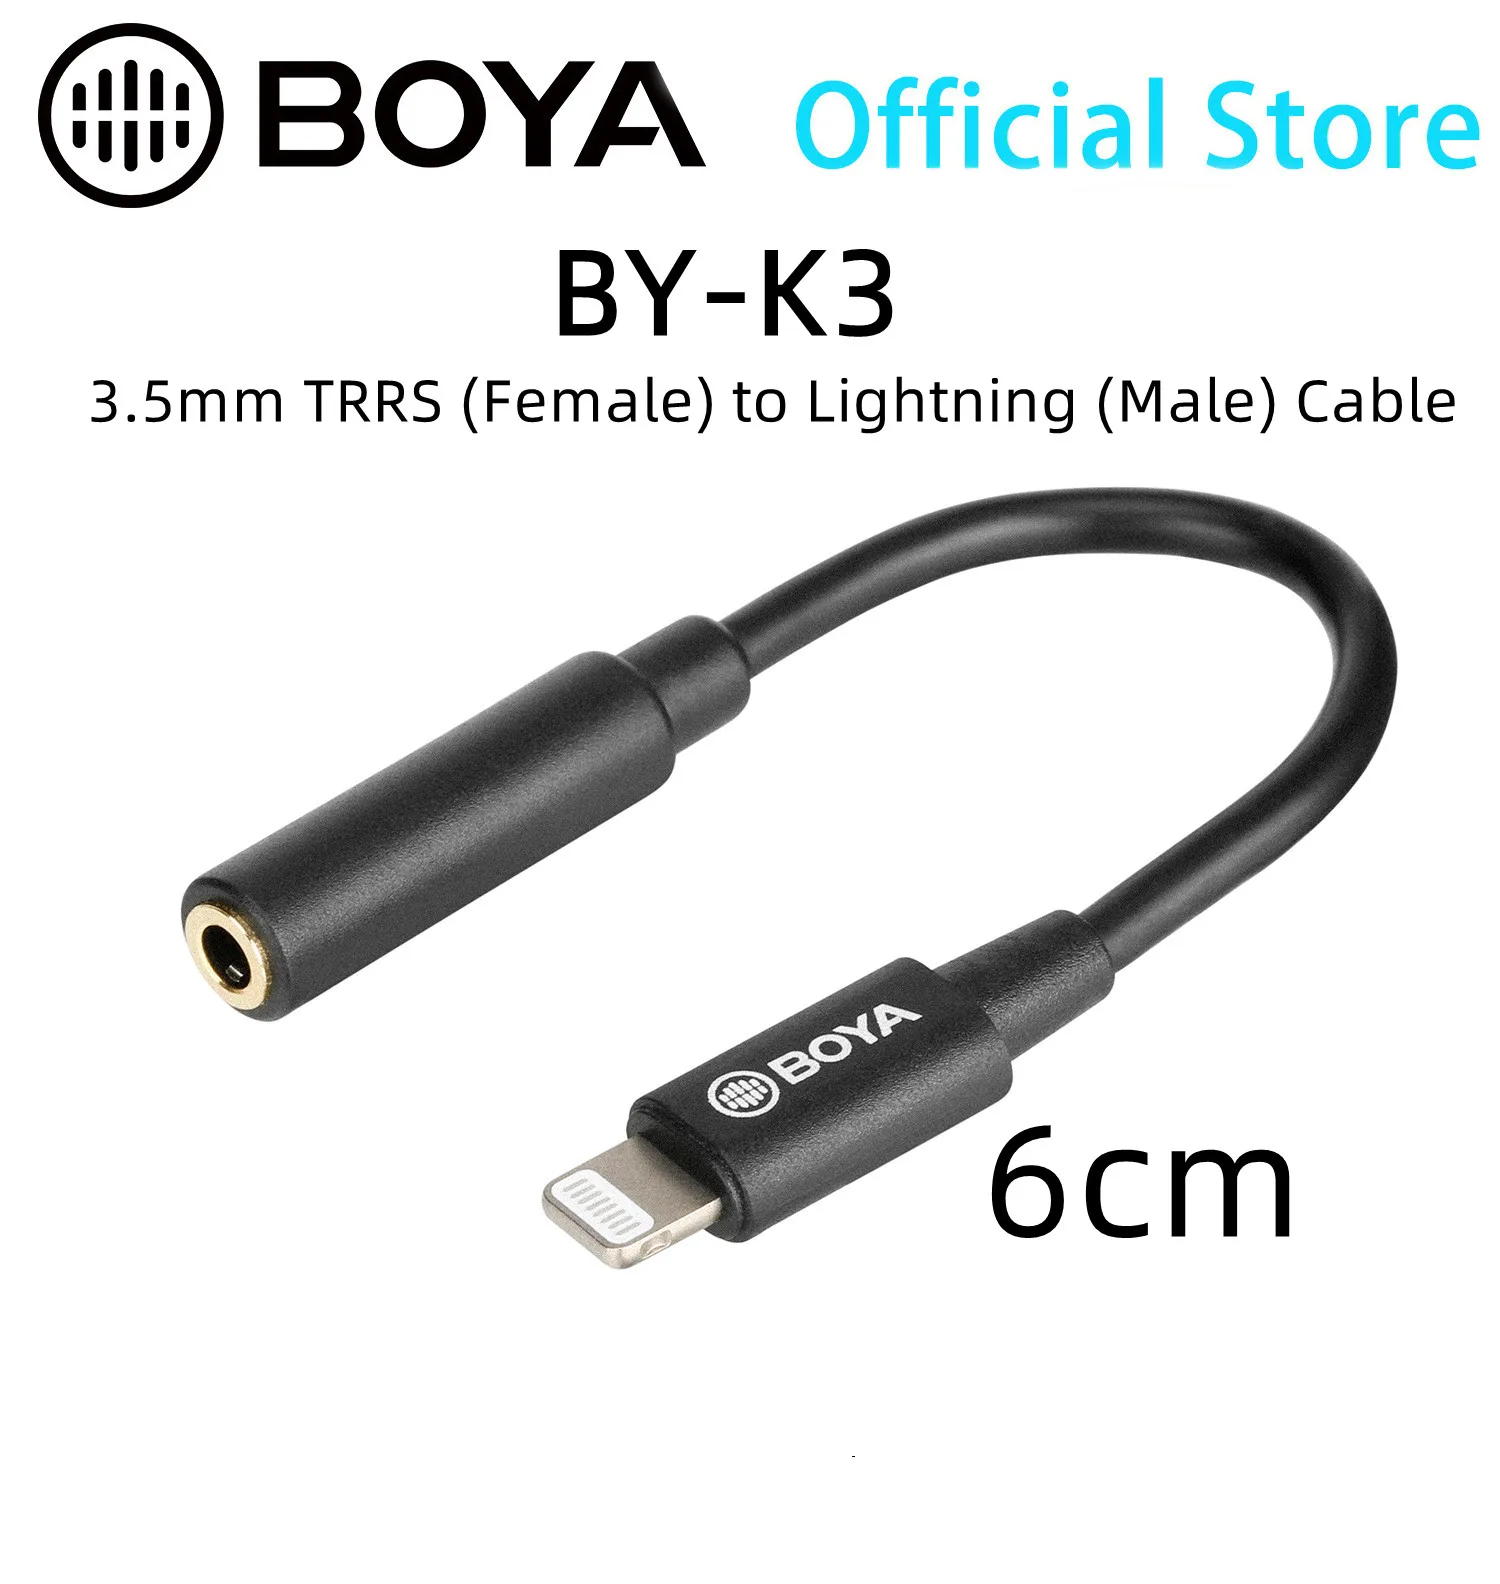 

BOYA BY-K3 6cm Audio Adapter Cable 3.5mm TRRS Female to Apple MFi Certified Lightning for iPhone iPad iPod touch iOS Devices